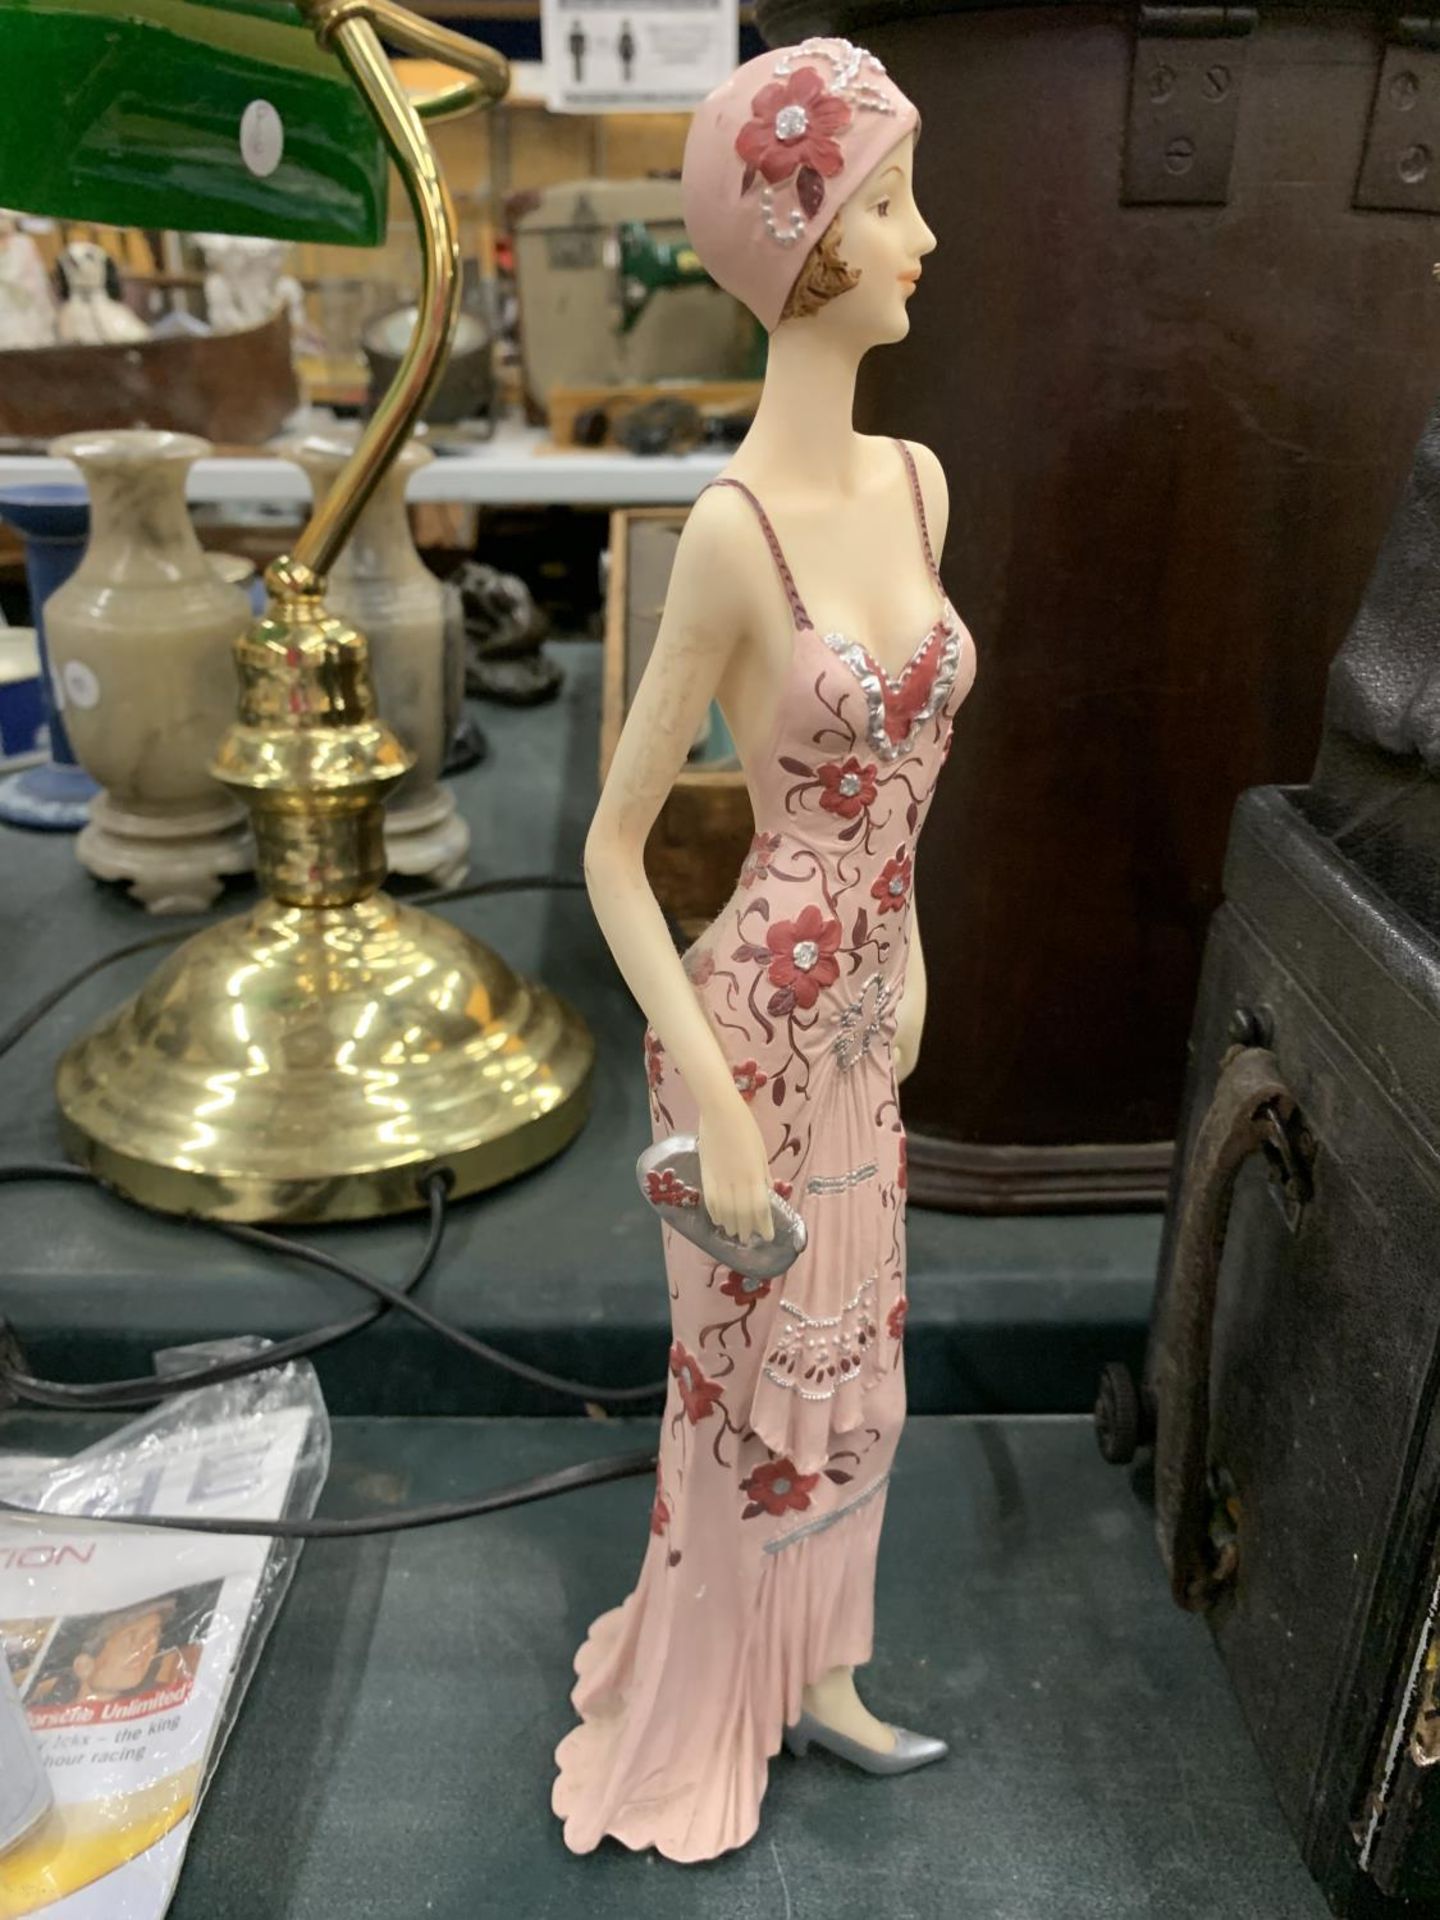 AN ART DECO STYLE FIGURINE HEIGHT 32CM - Image 2 of 4